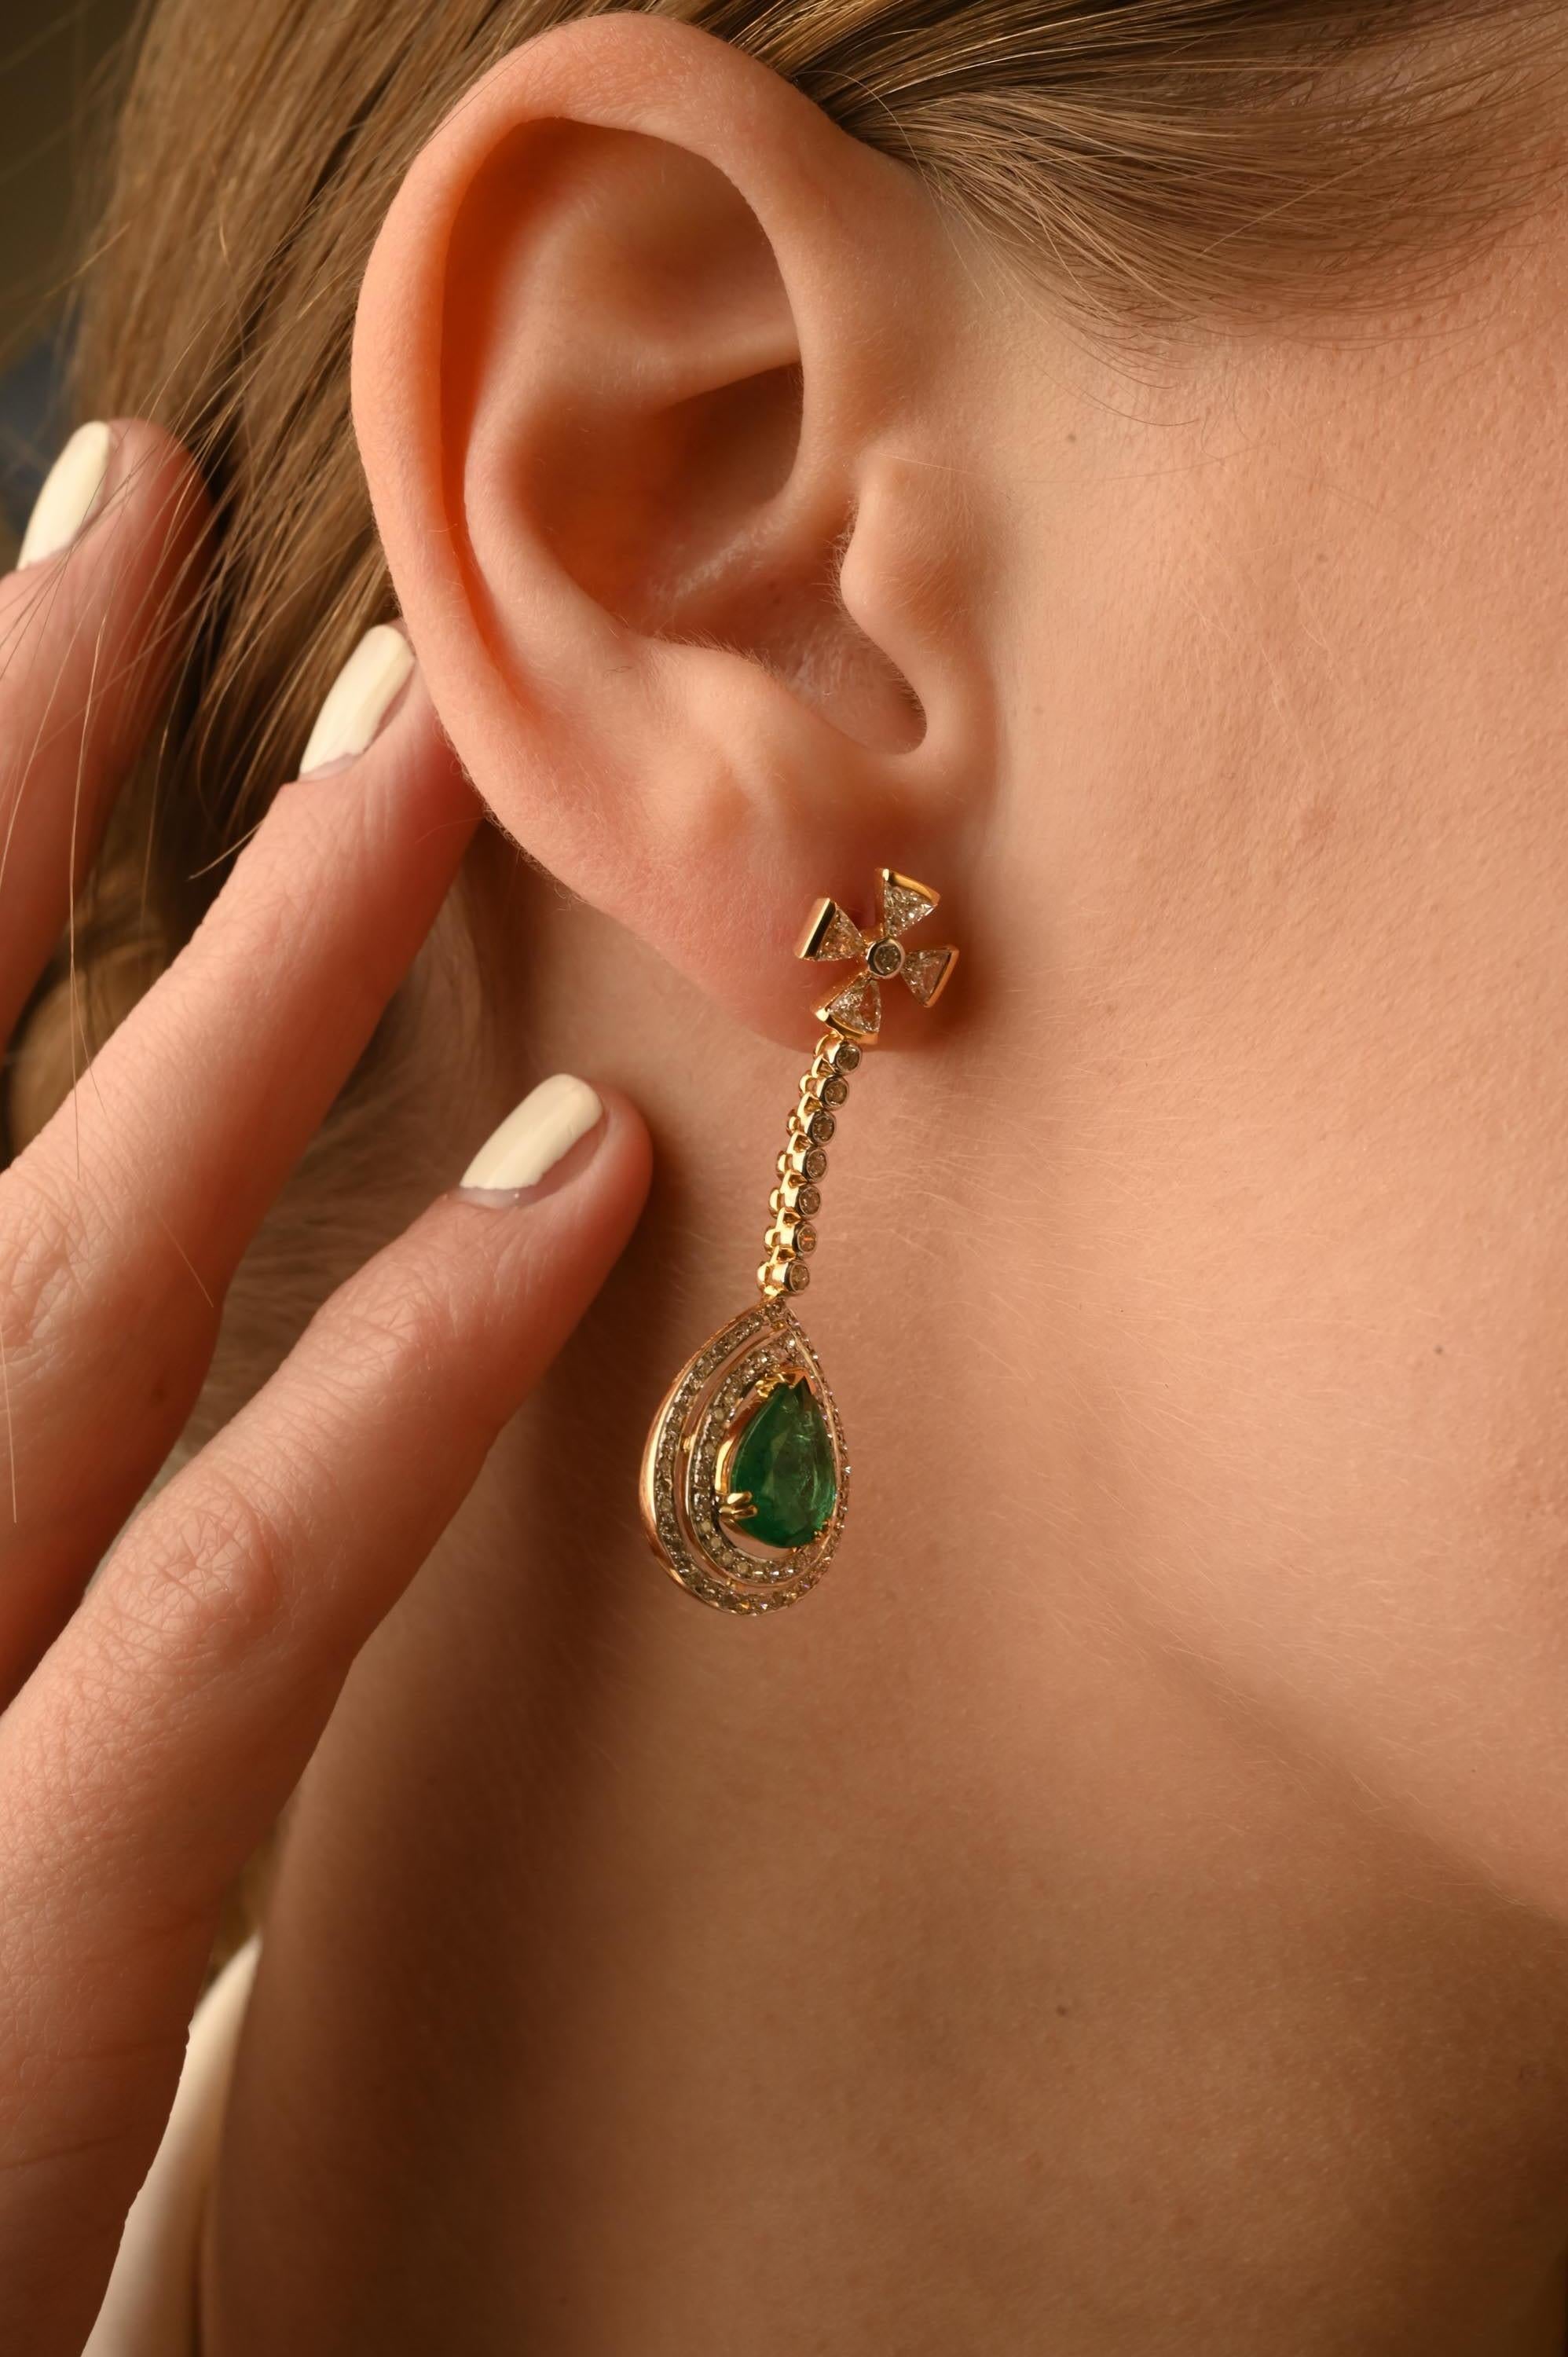 Statement Diamond Natural Emerald Dangle Drop Earrings 14k Solid Yellow Gold In New Condition For Sale In Houston, TX